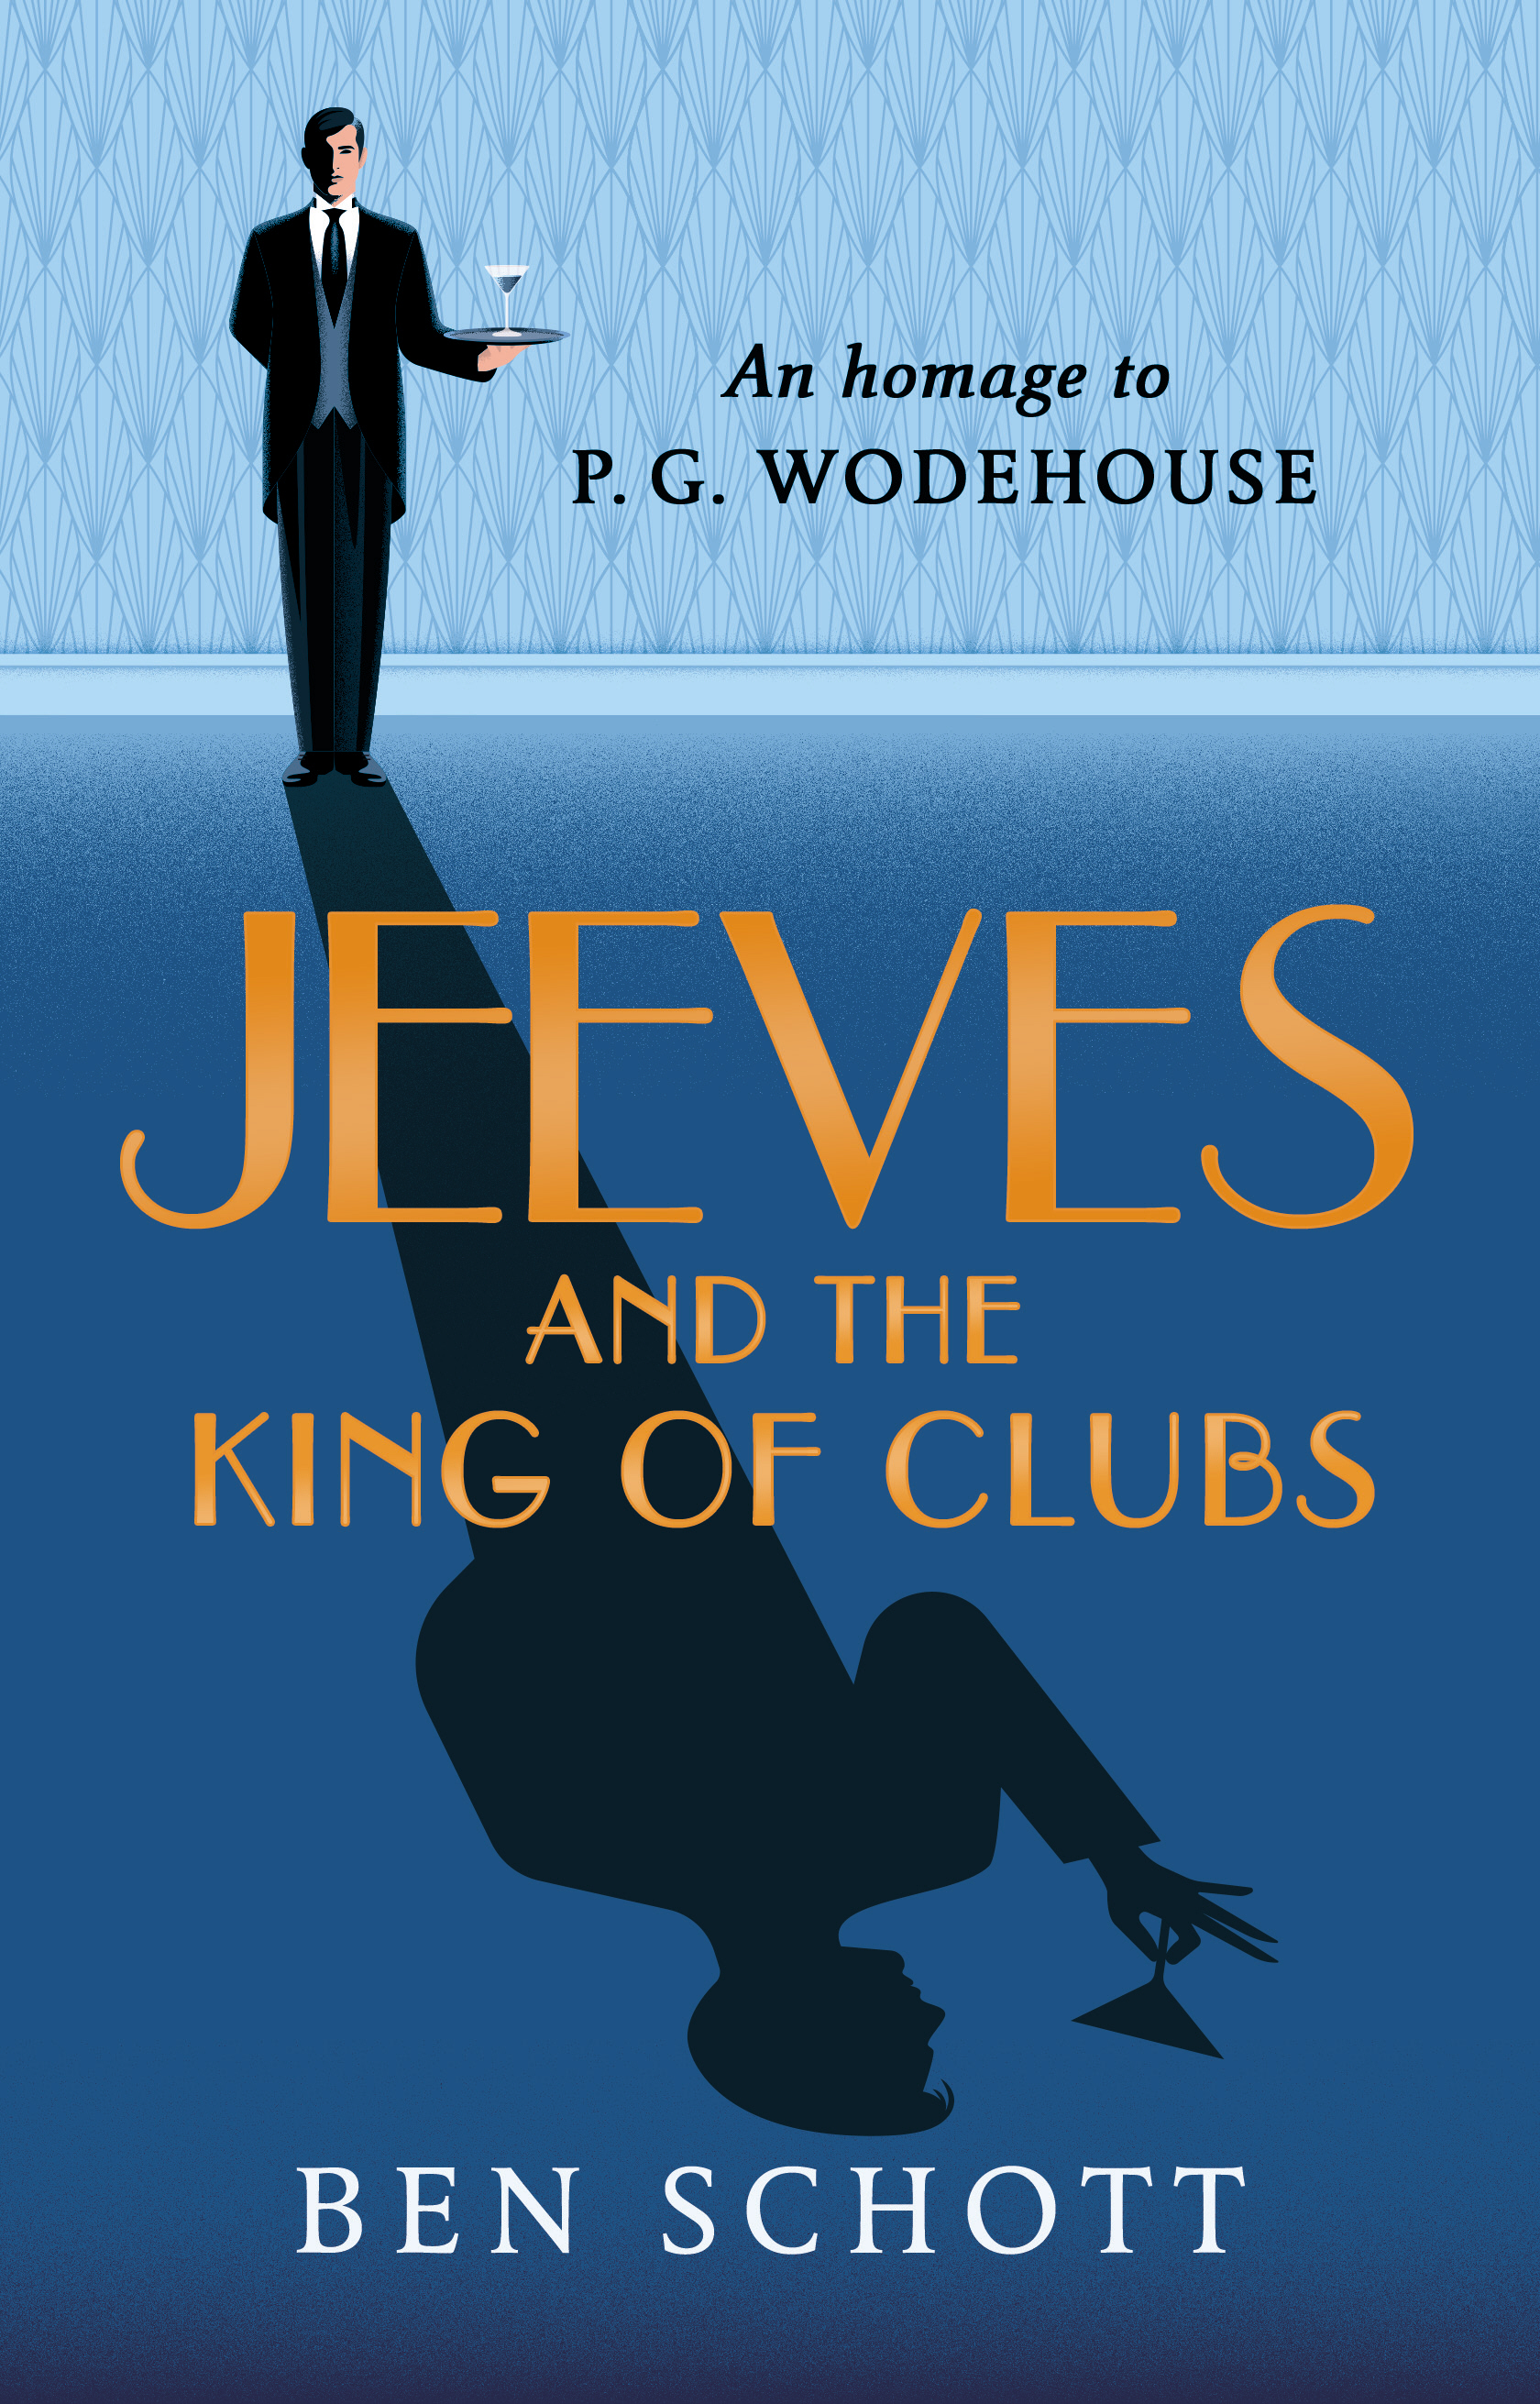 An Homage to Wodehouse: Jeeves and the King of Clubs by Ben Schott